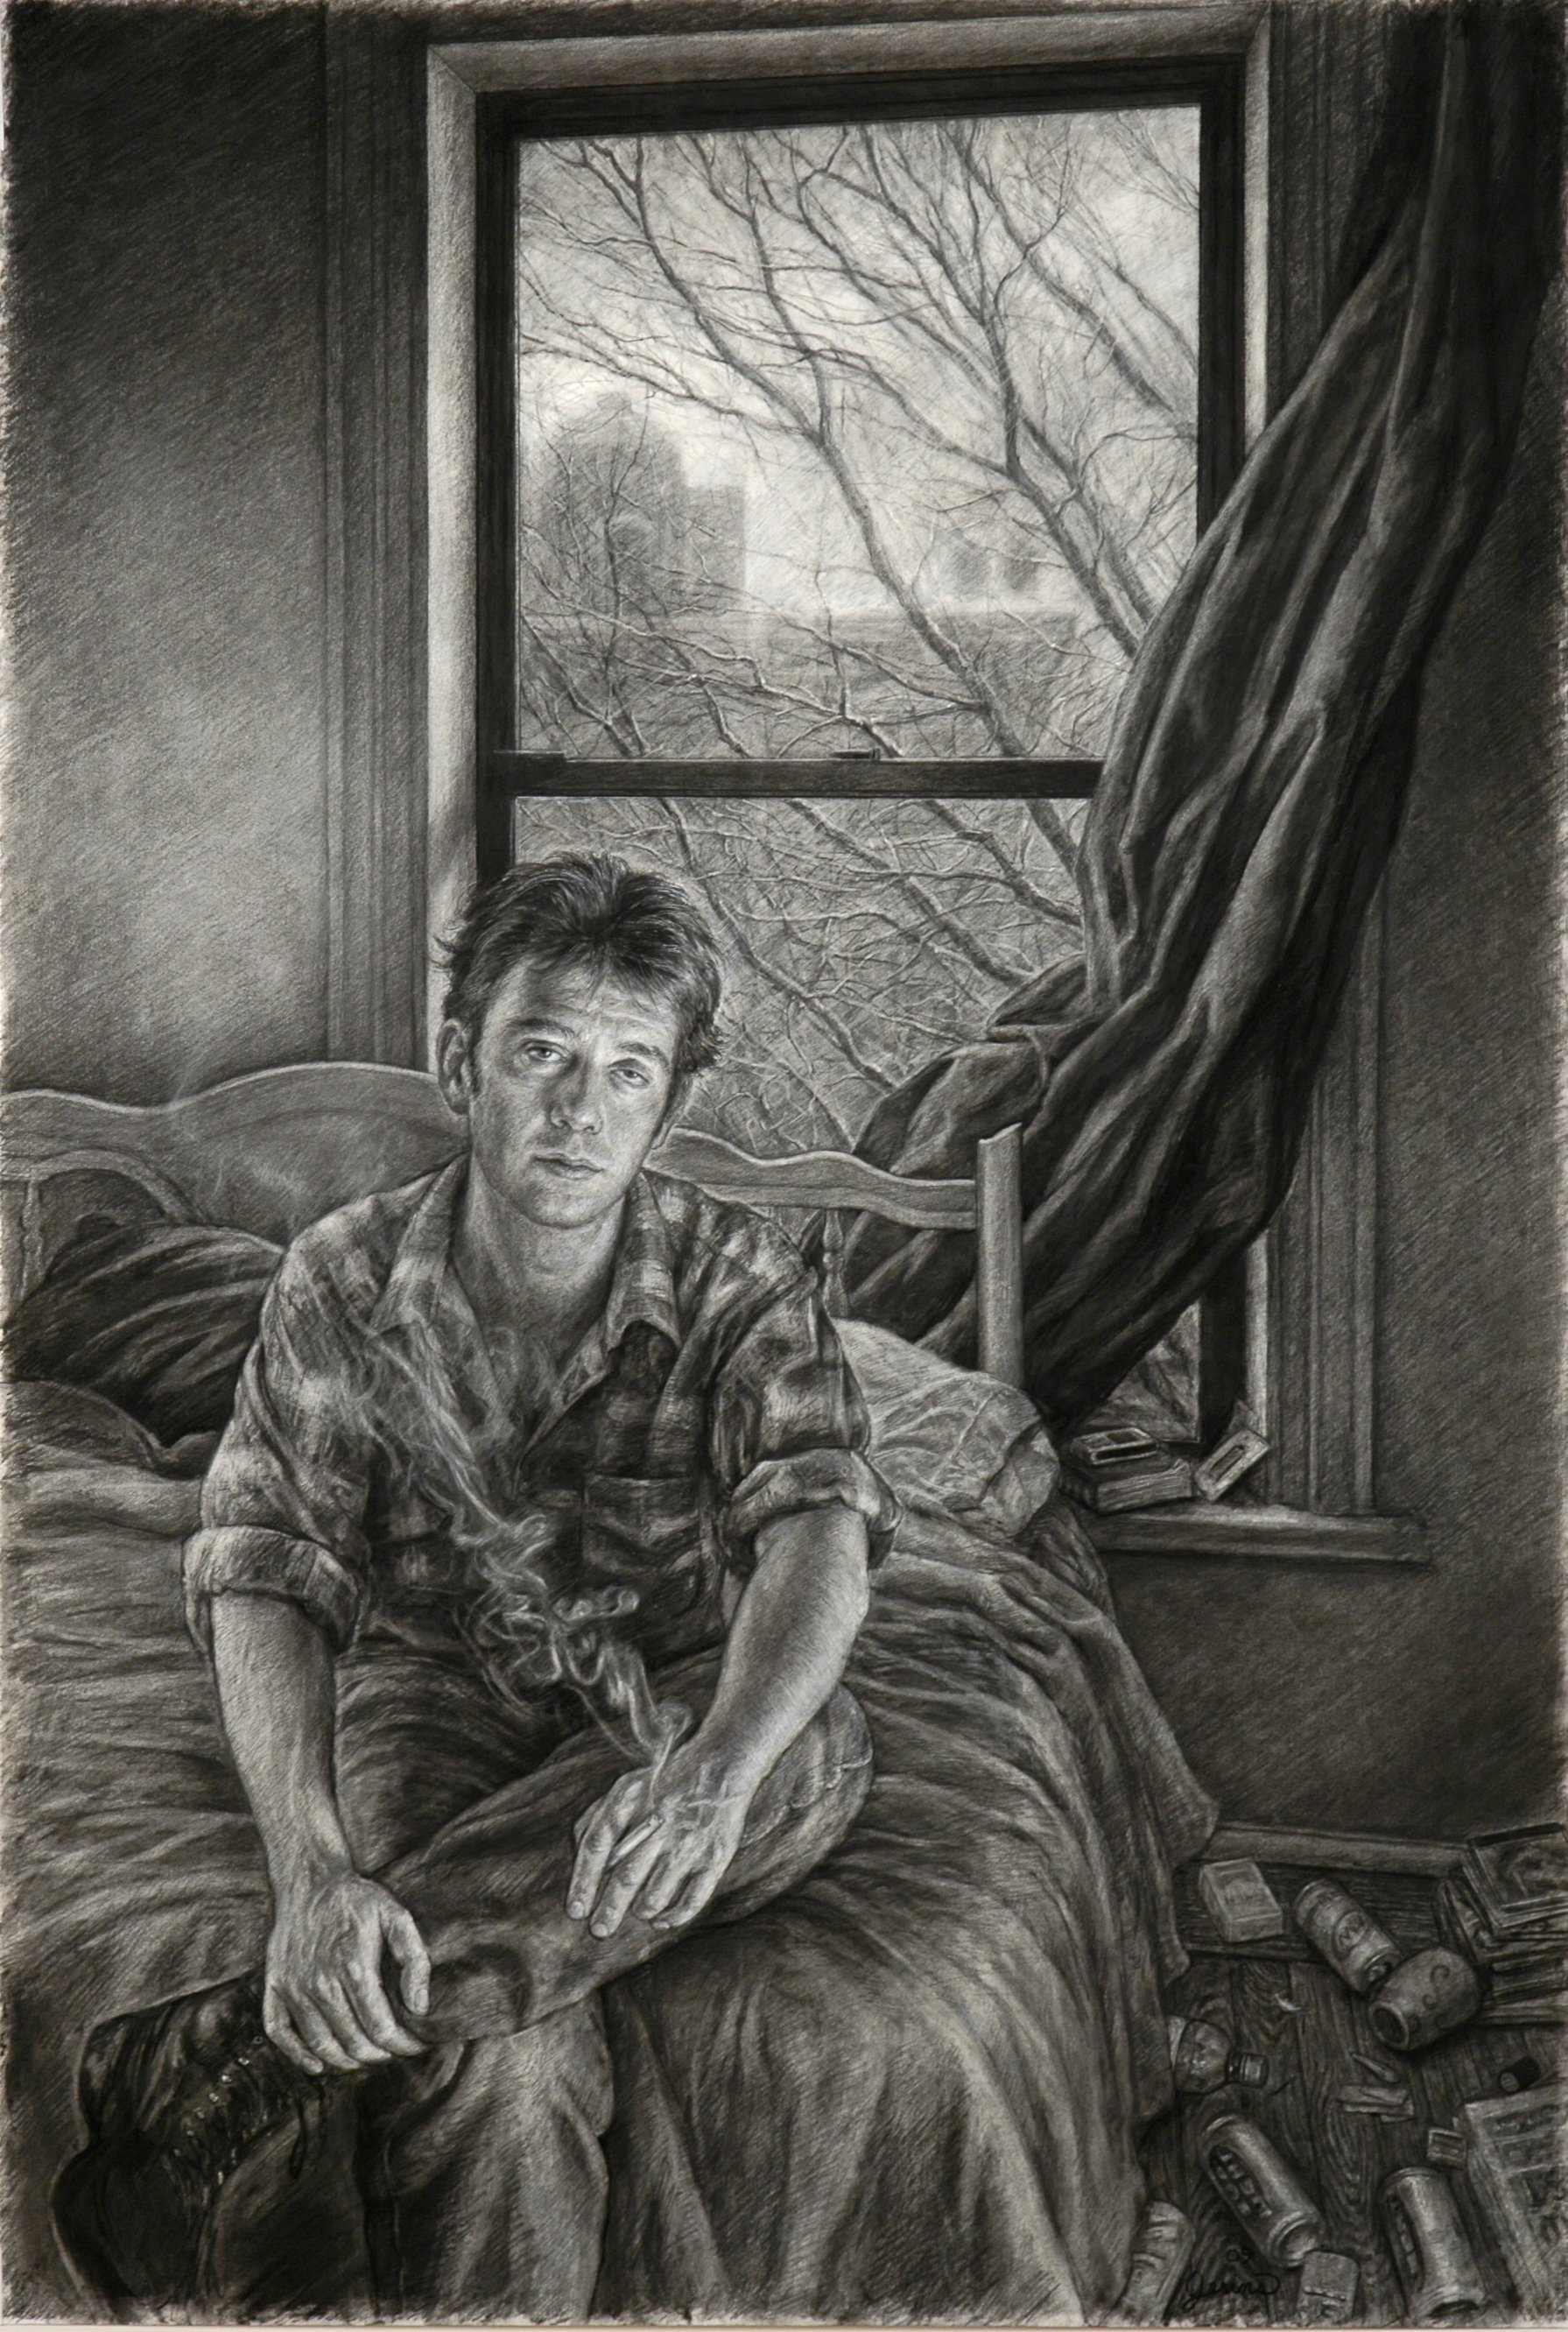   Edgar Jerins   Jay Alone  2010 Charcoal on paper 44 x 30 inches 